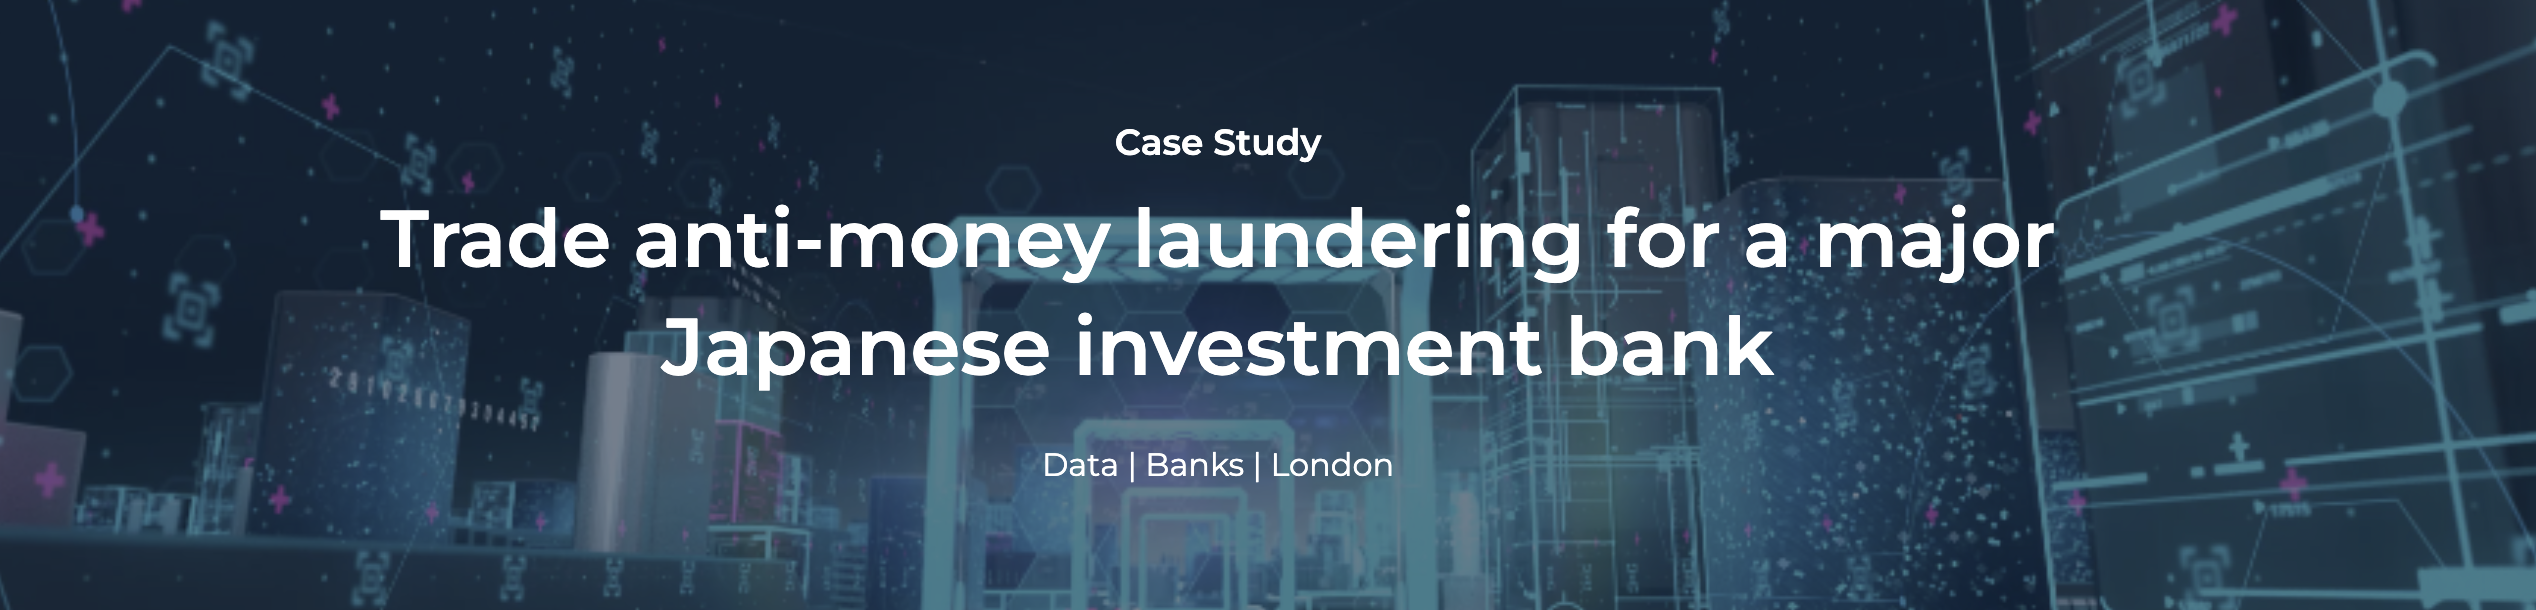 Data Case Study: Trade anti-money laundering for an investment bank